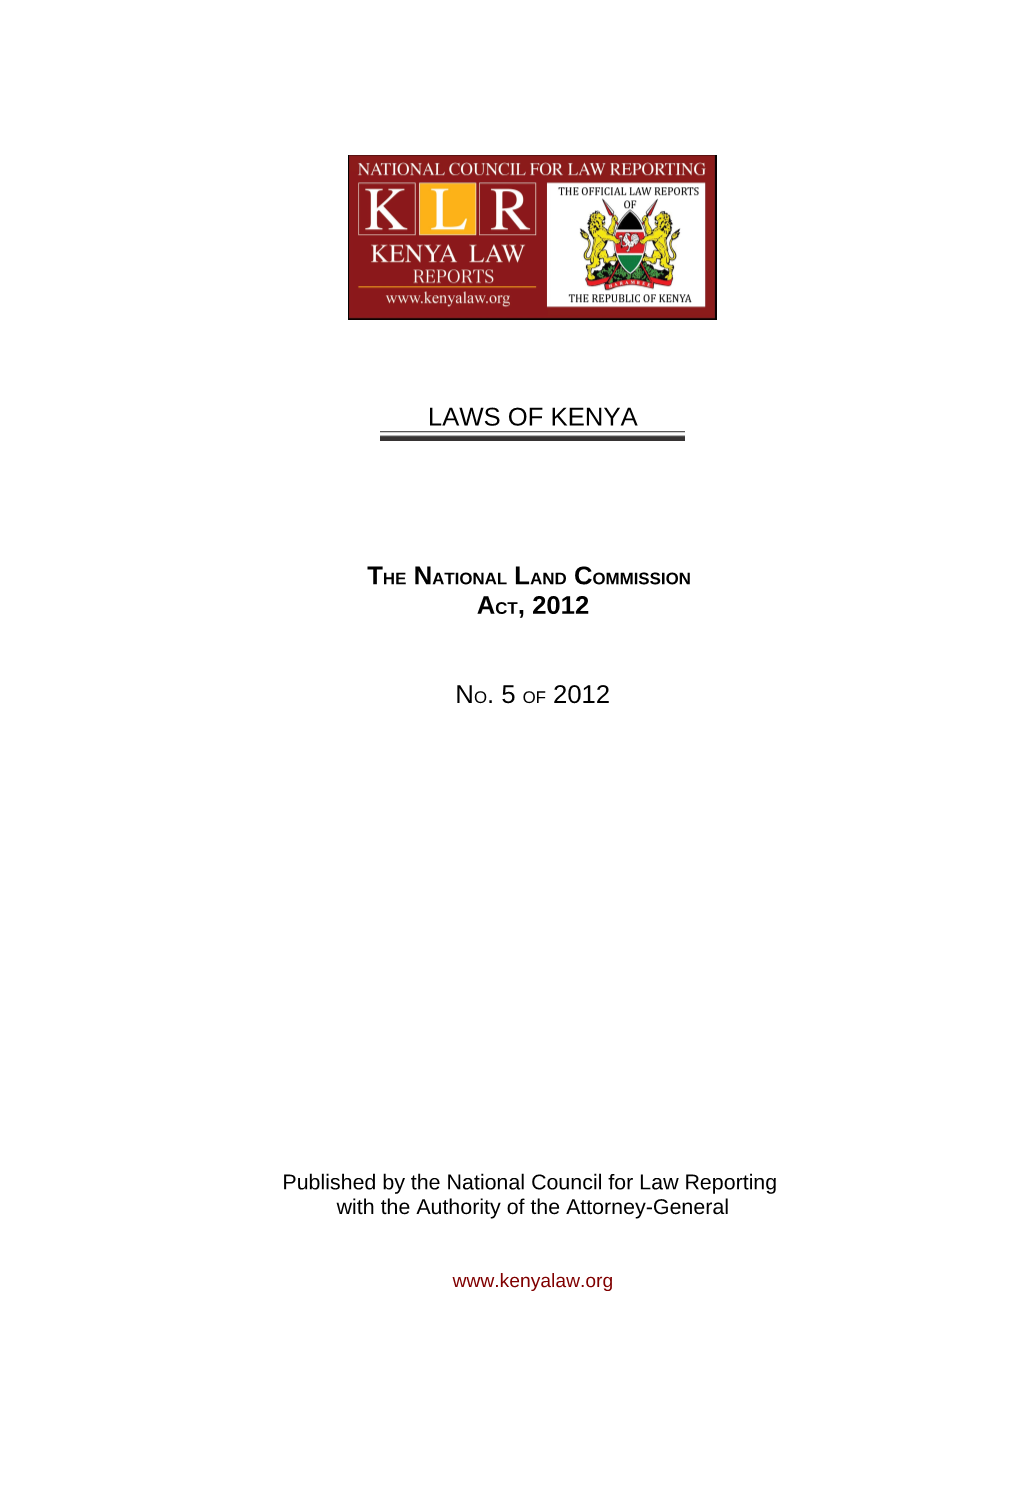 National Land Commission Act (No 5 of 2012)